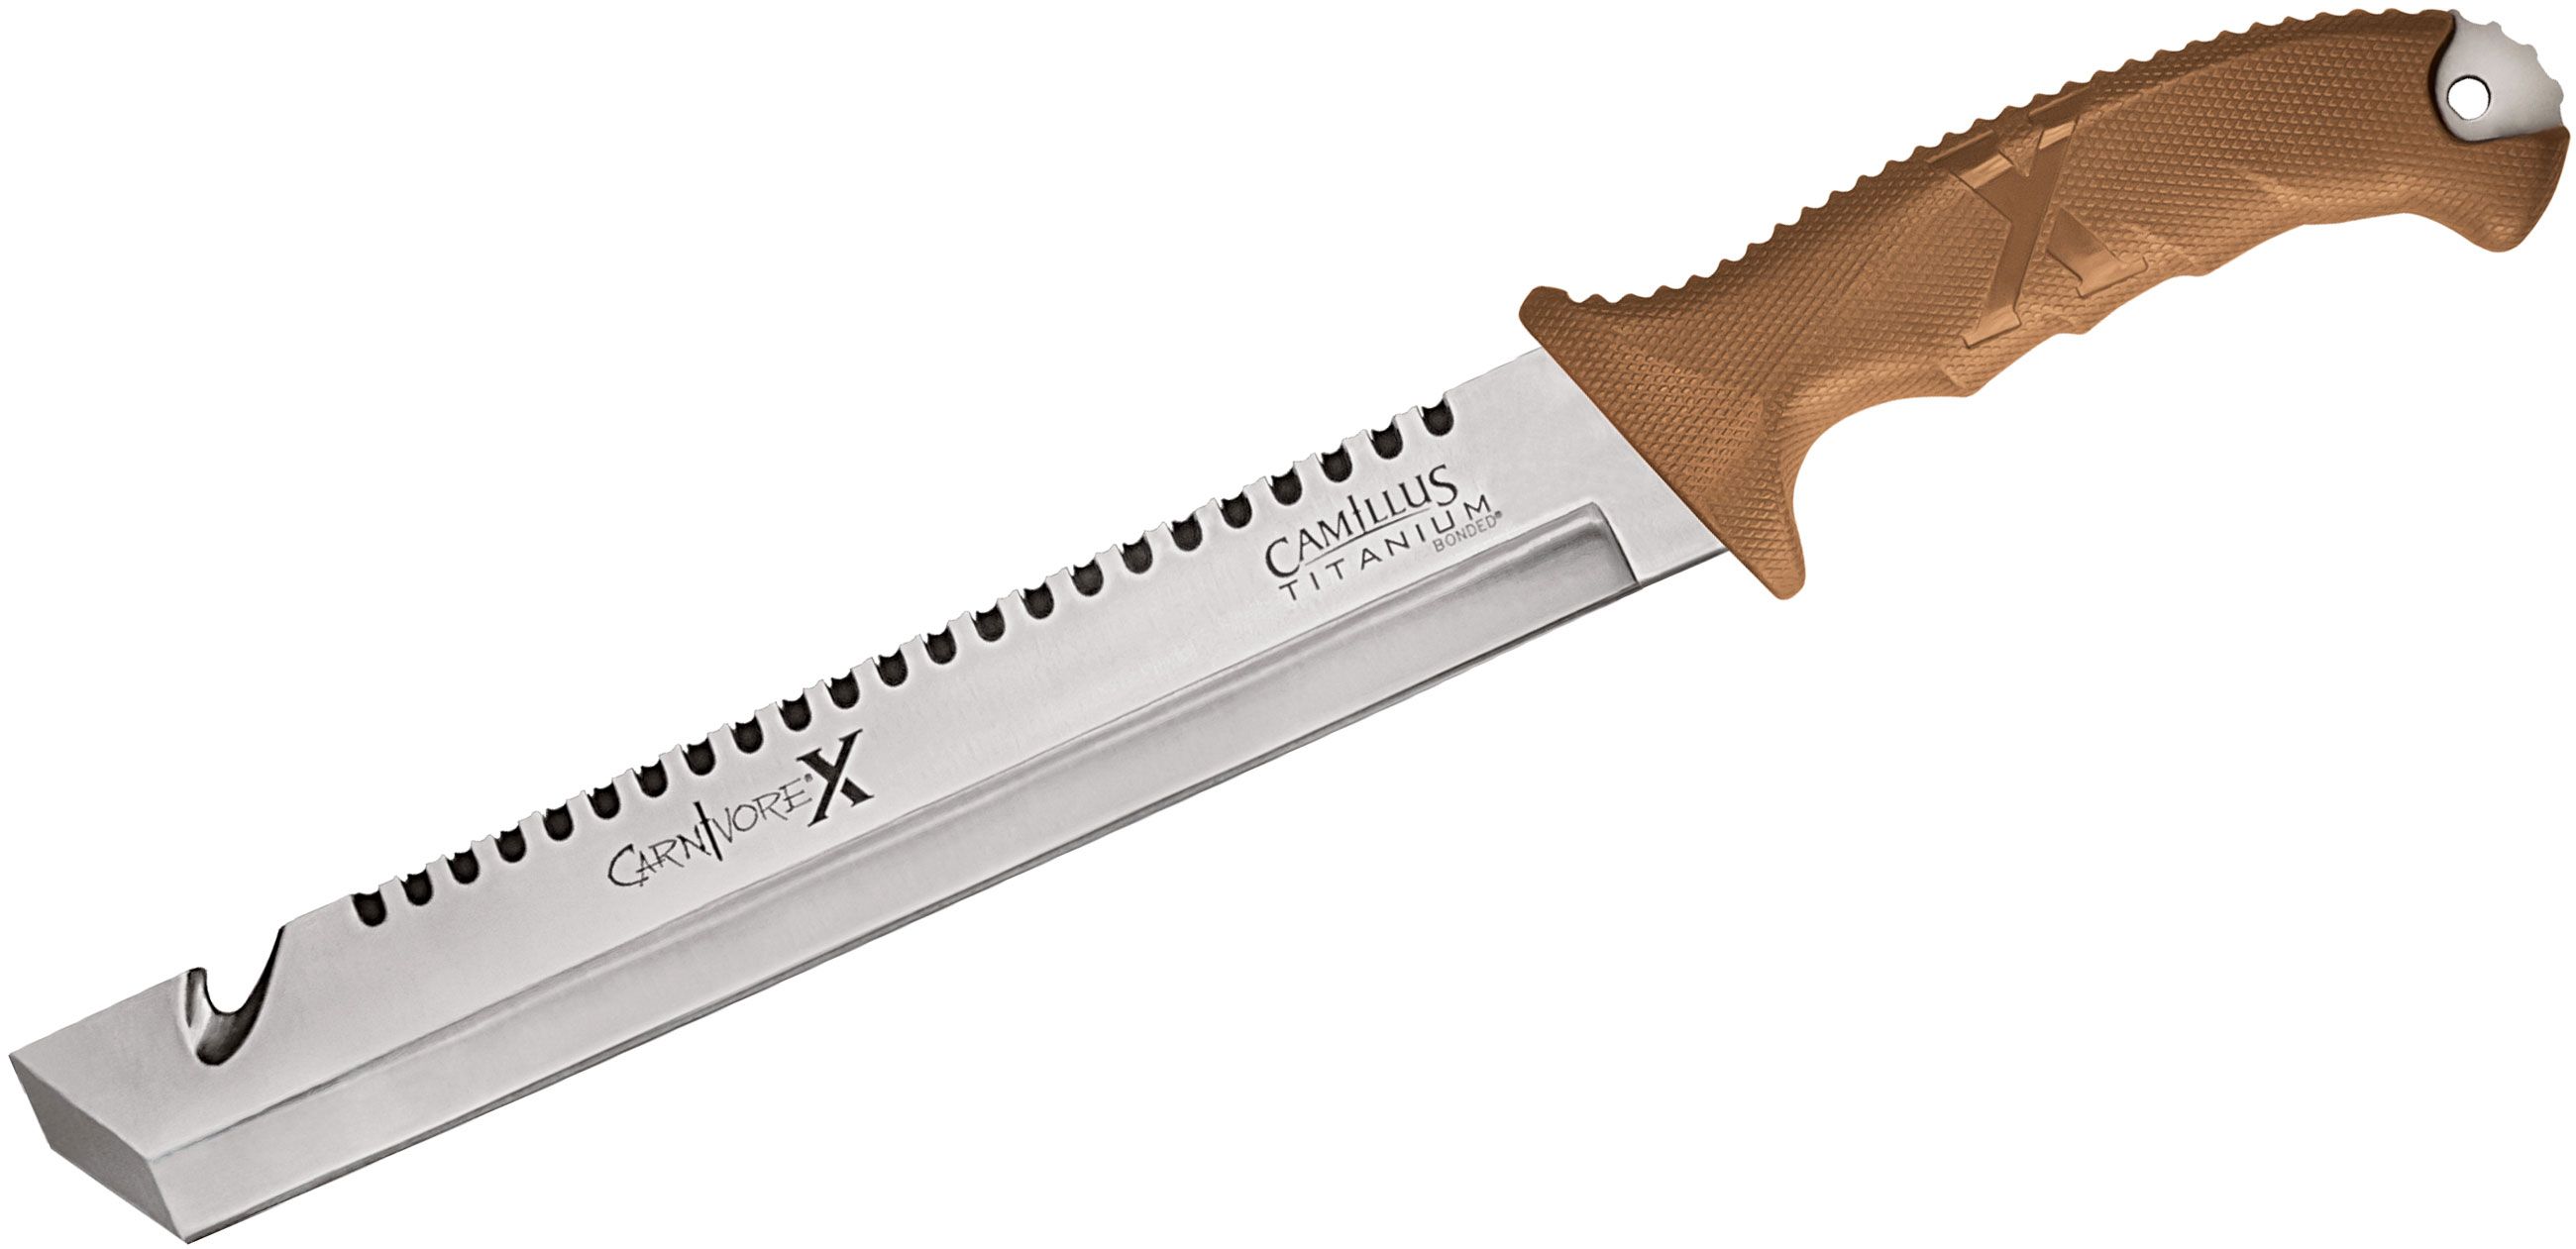 11-1/4 in. Machete with Serrated Blade